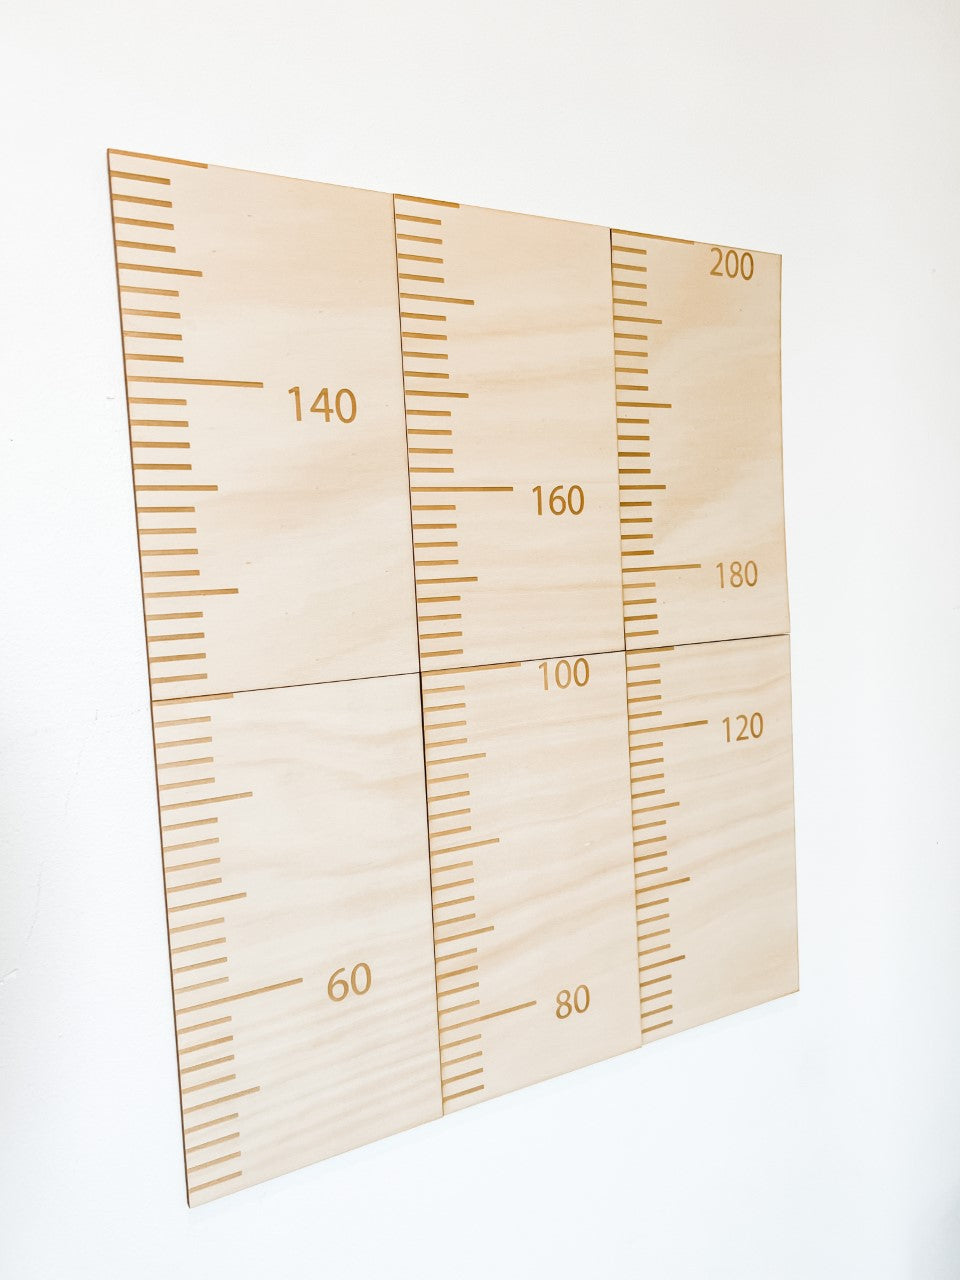 personalised growth chart